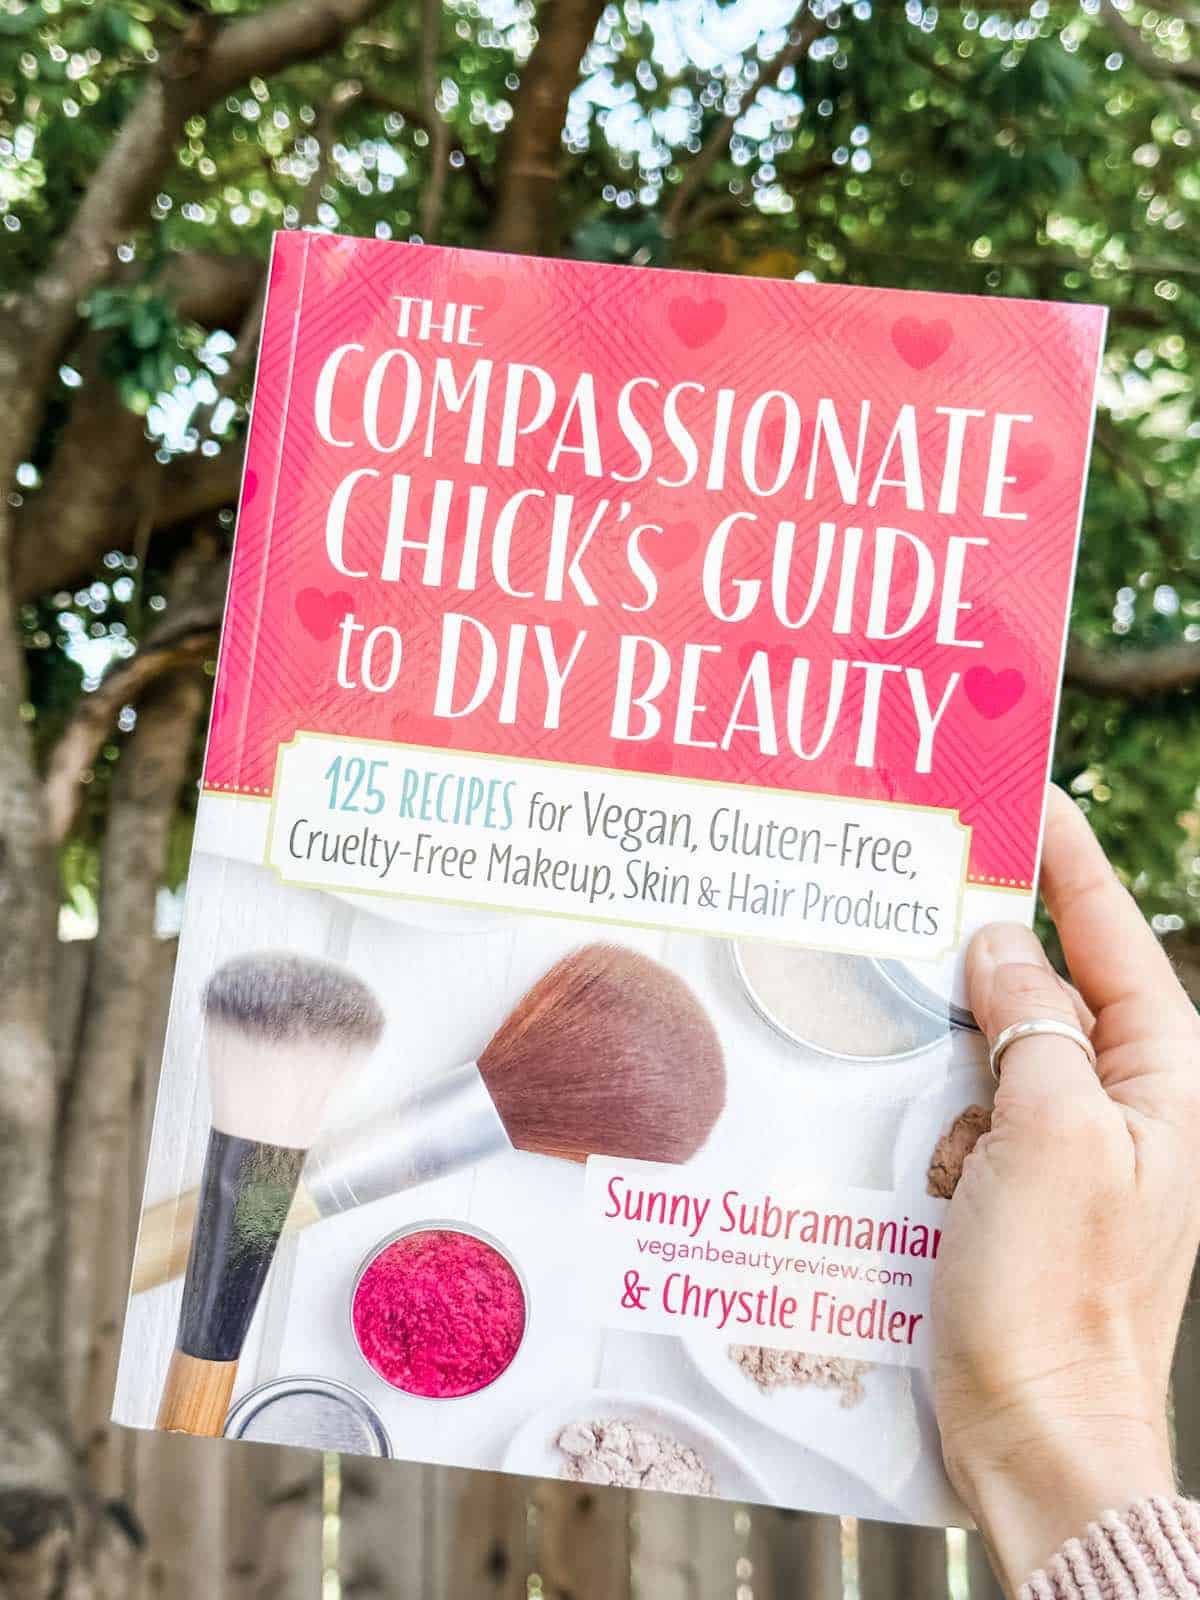 Holding out a copy of the vegan beauty book The Compassionate Chick's Guide to DIY Beauty by Sunny Subramanian. 